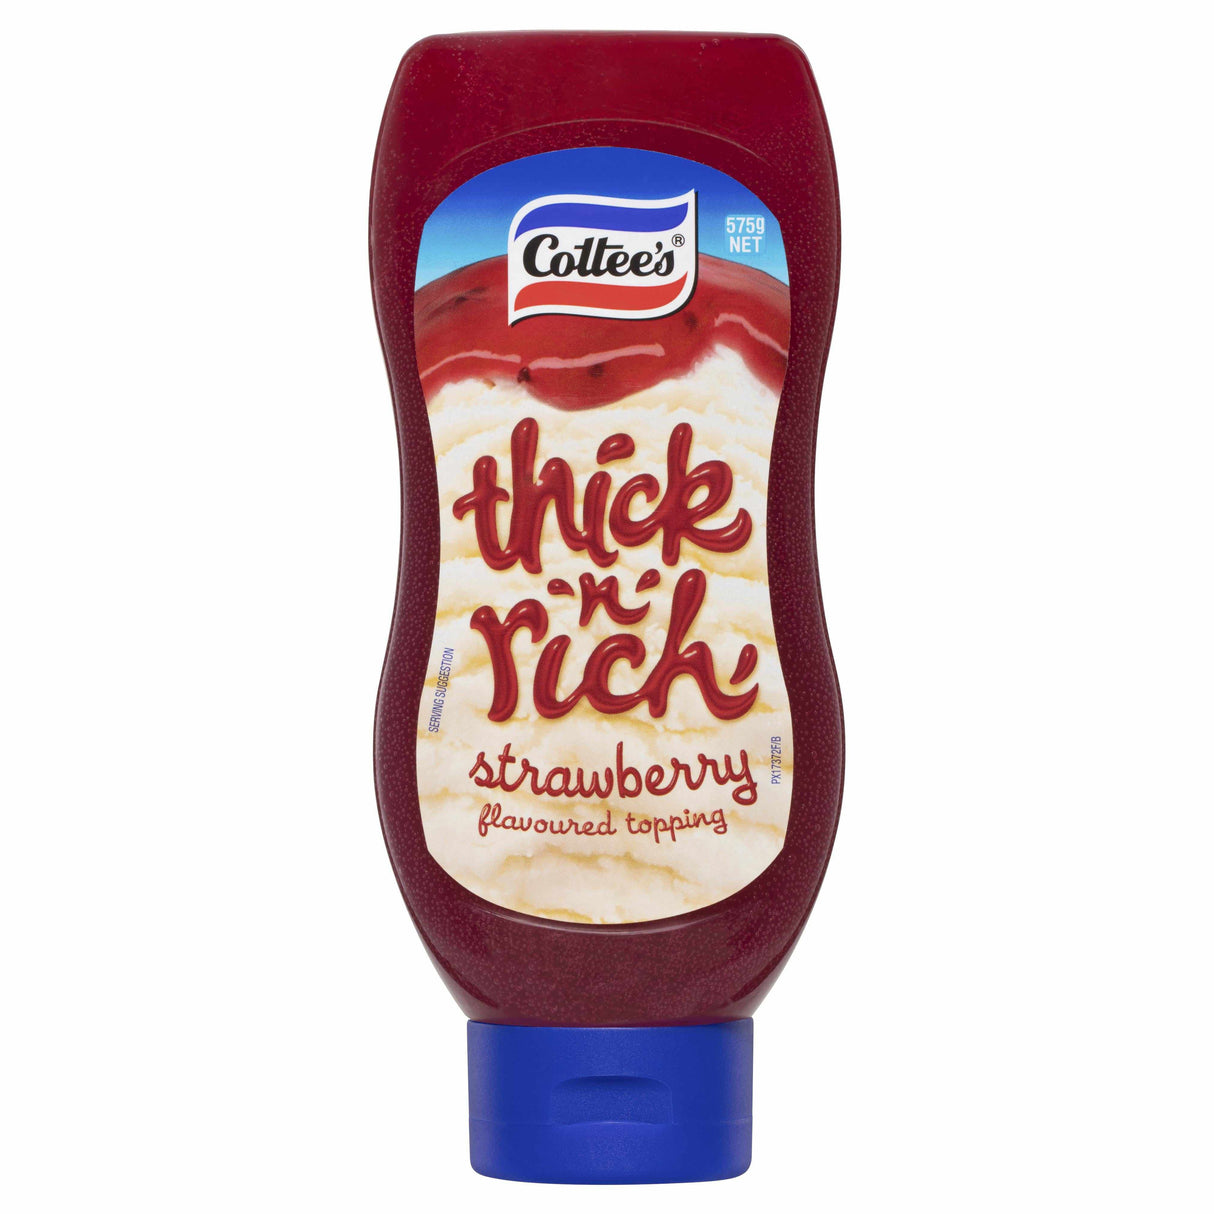 Cottee's Thick 'n' Rich Strawberry Flavoured Topping 575g